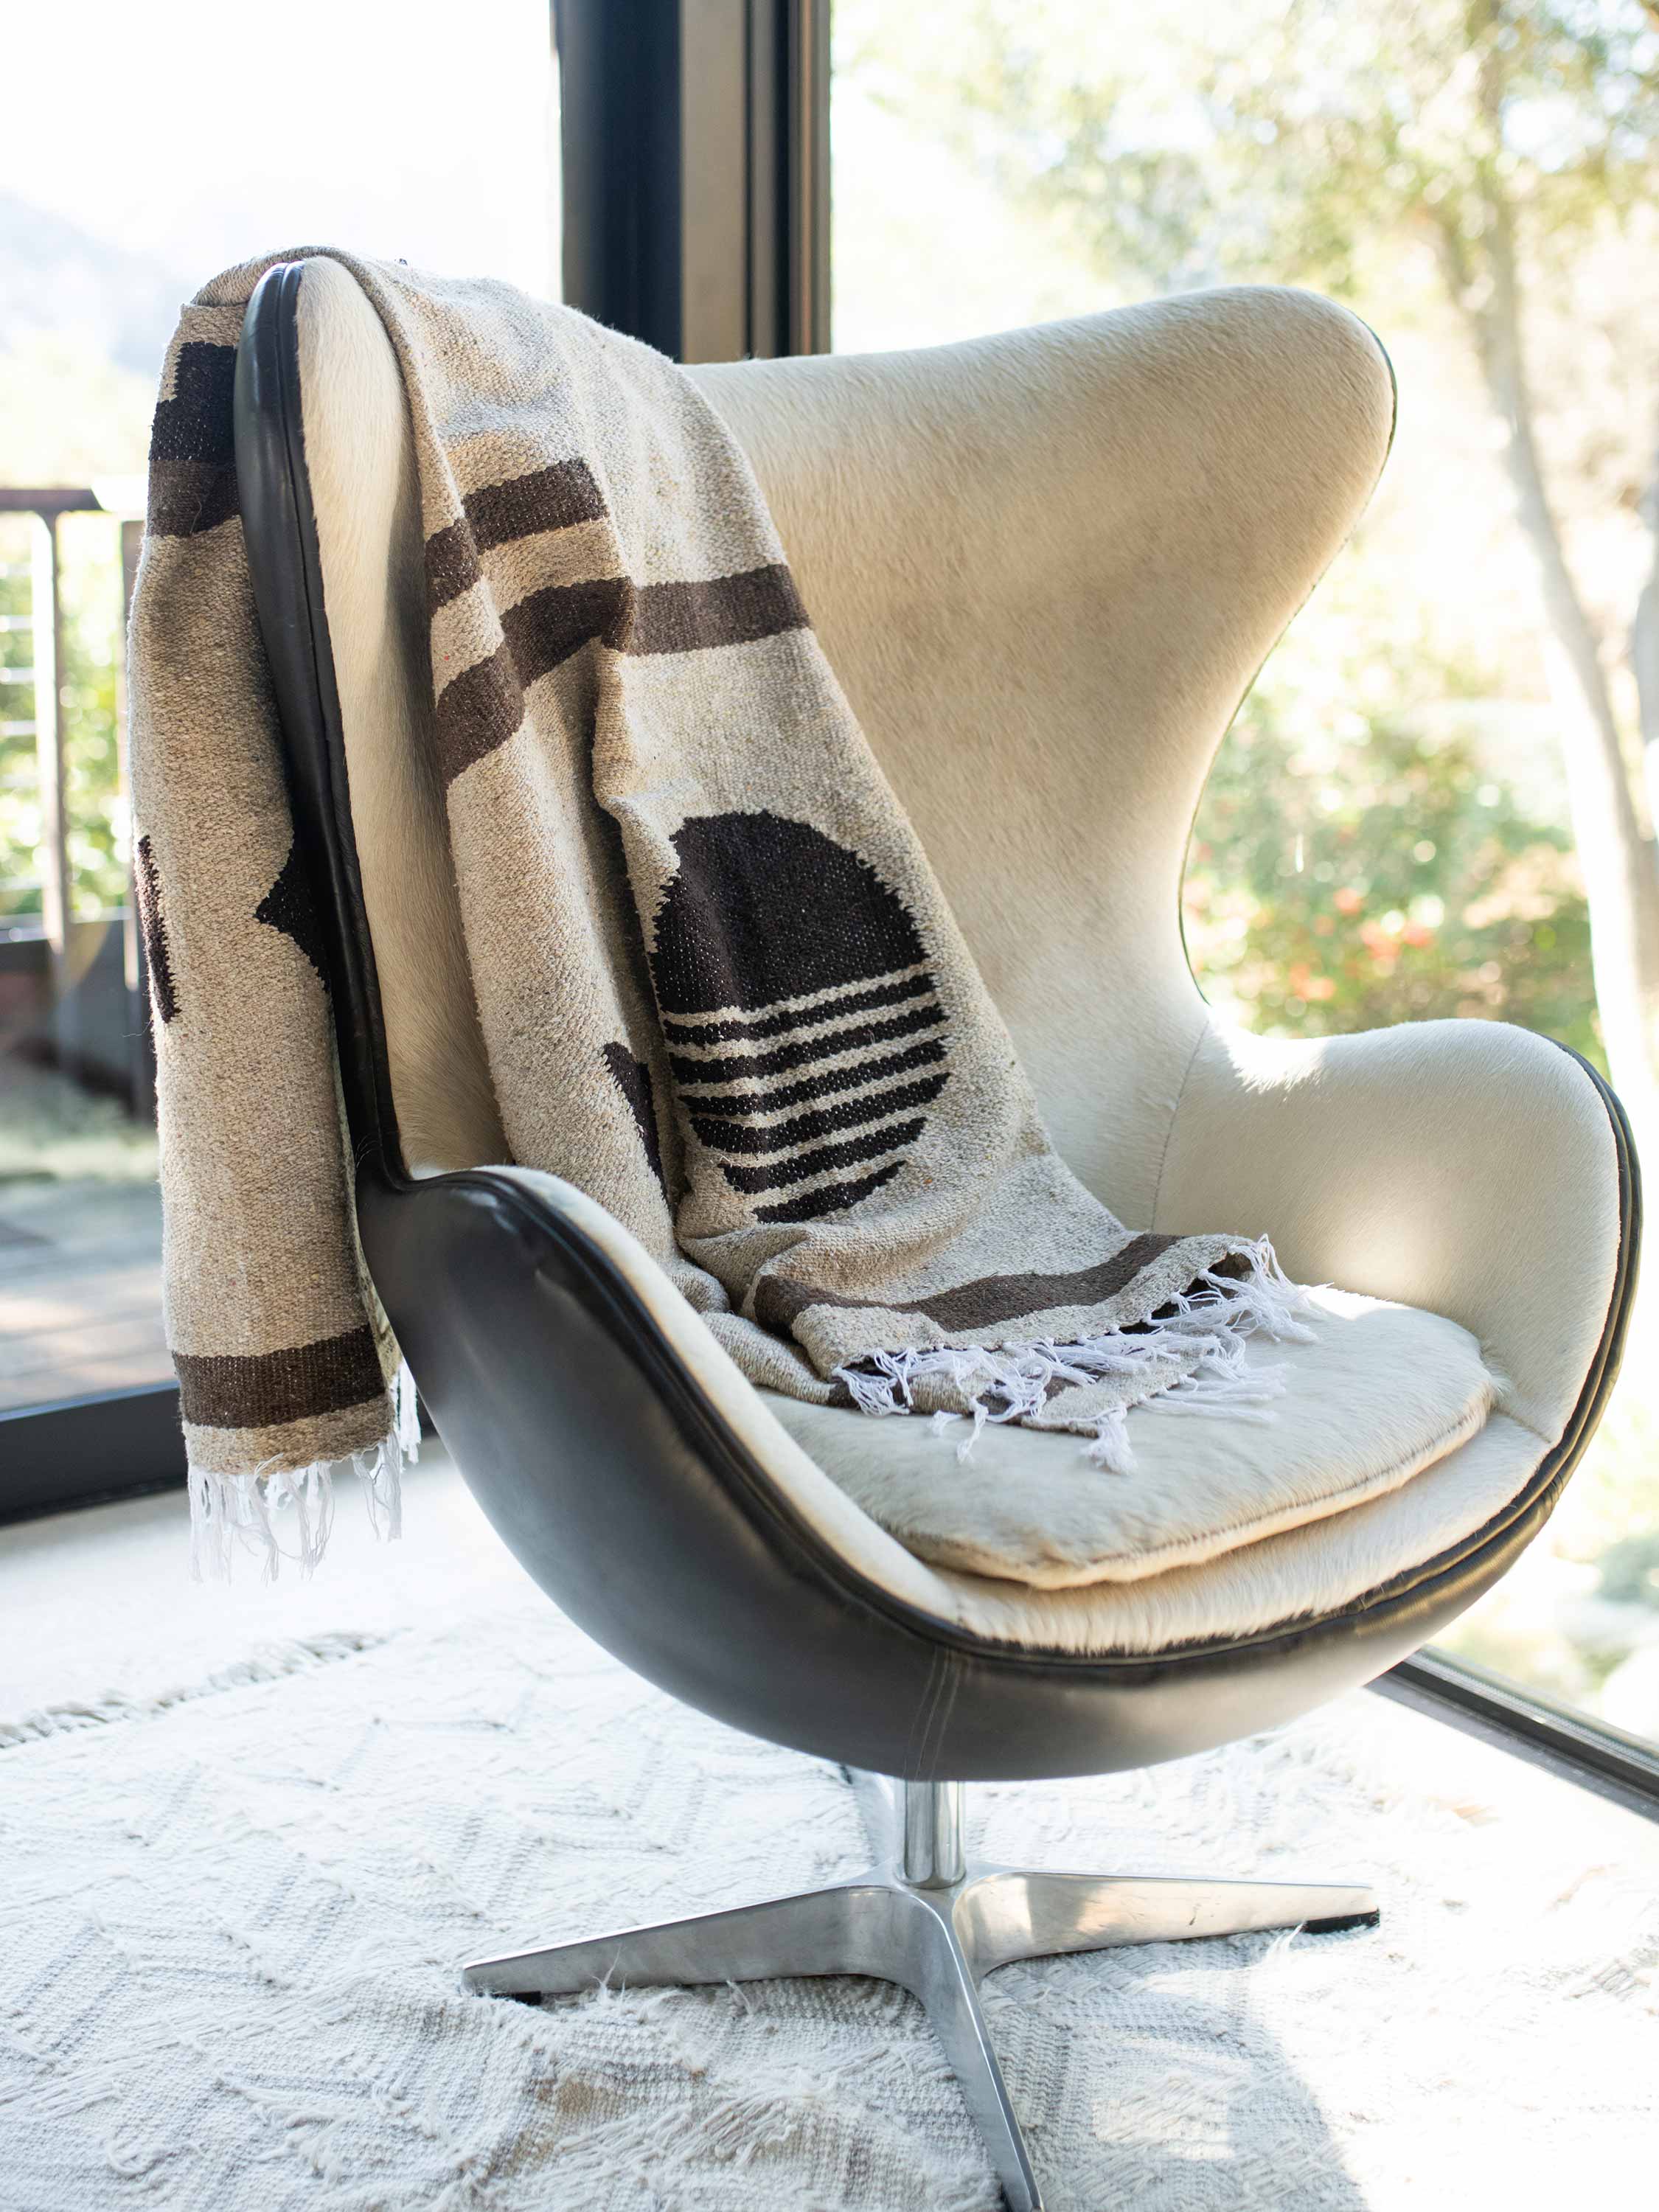 A cream and brown colored Mexican Blanket draped over a chair.